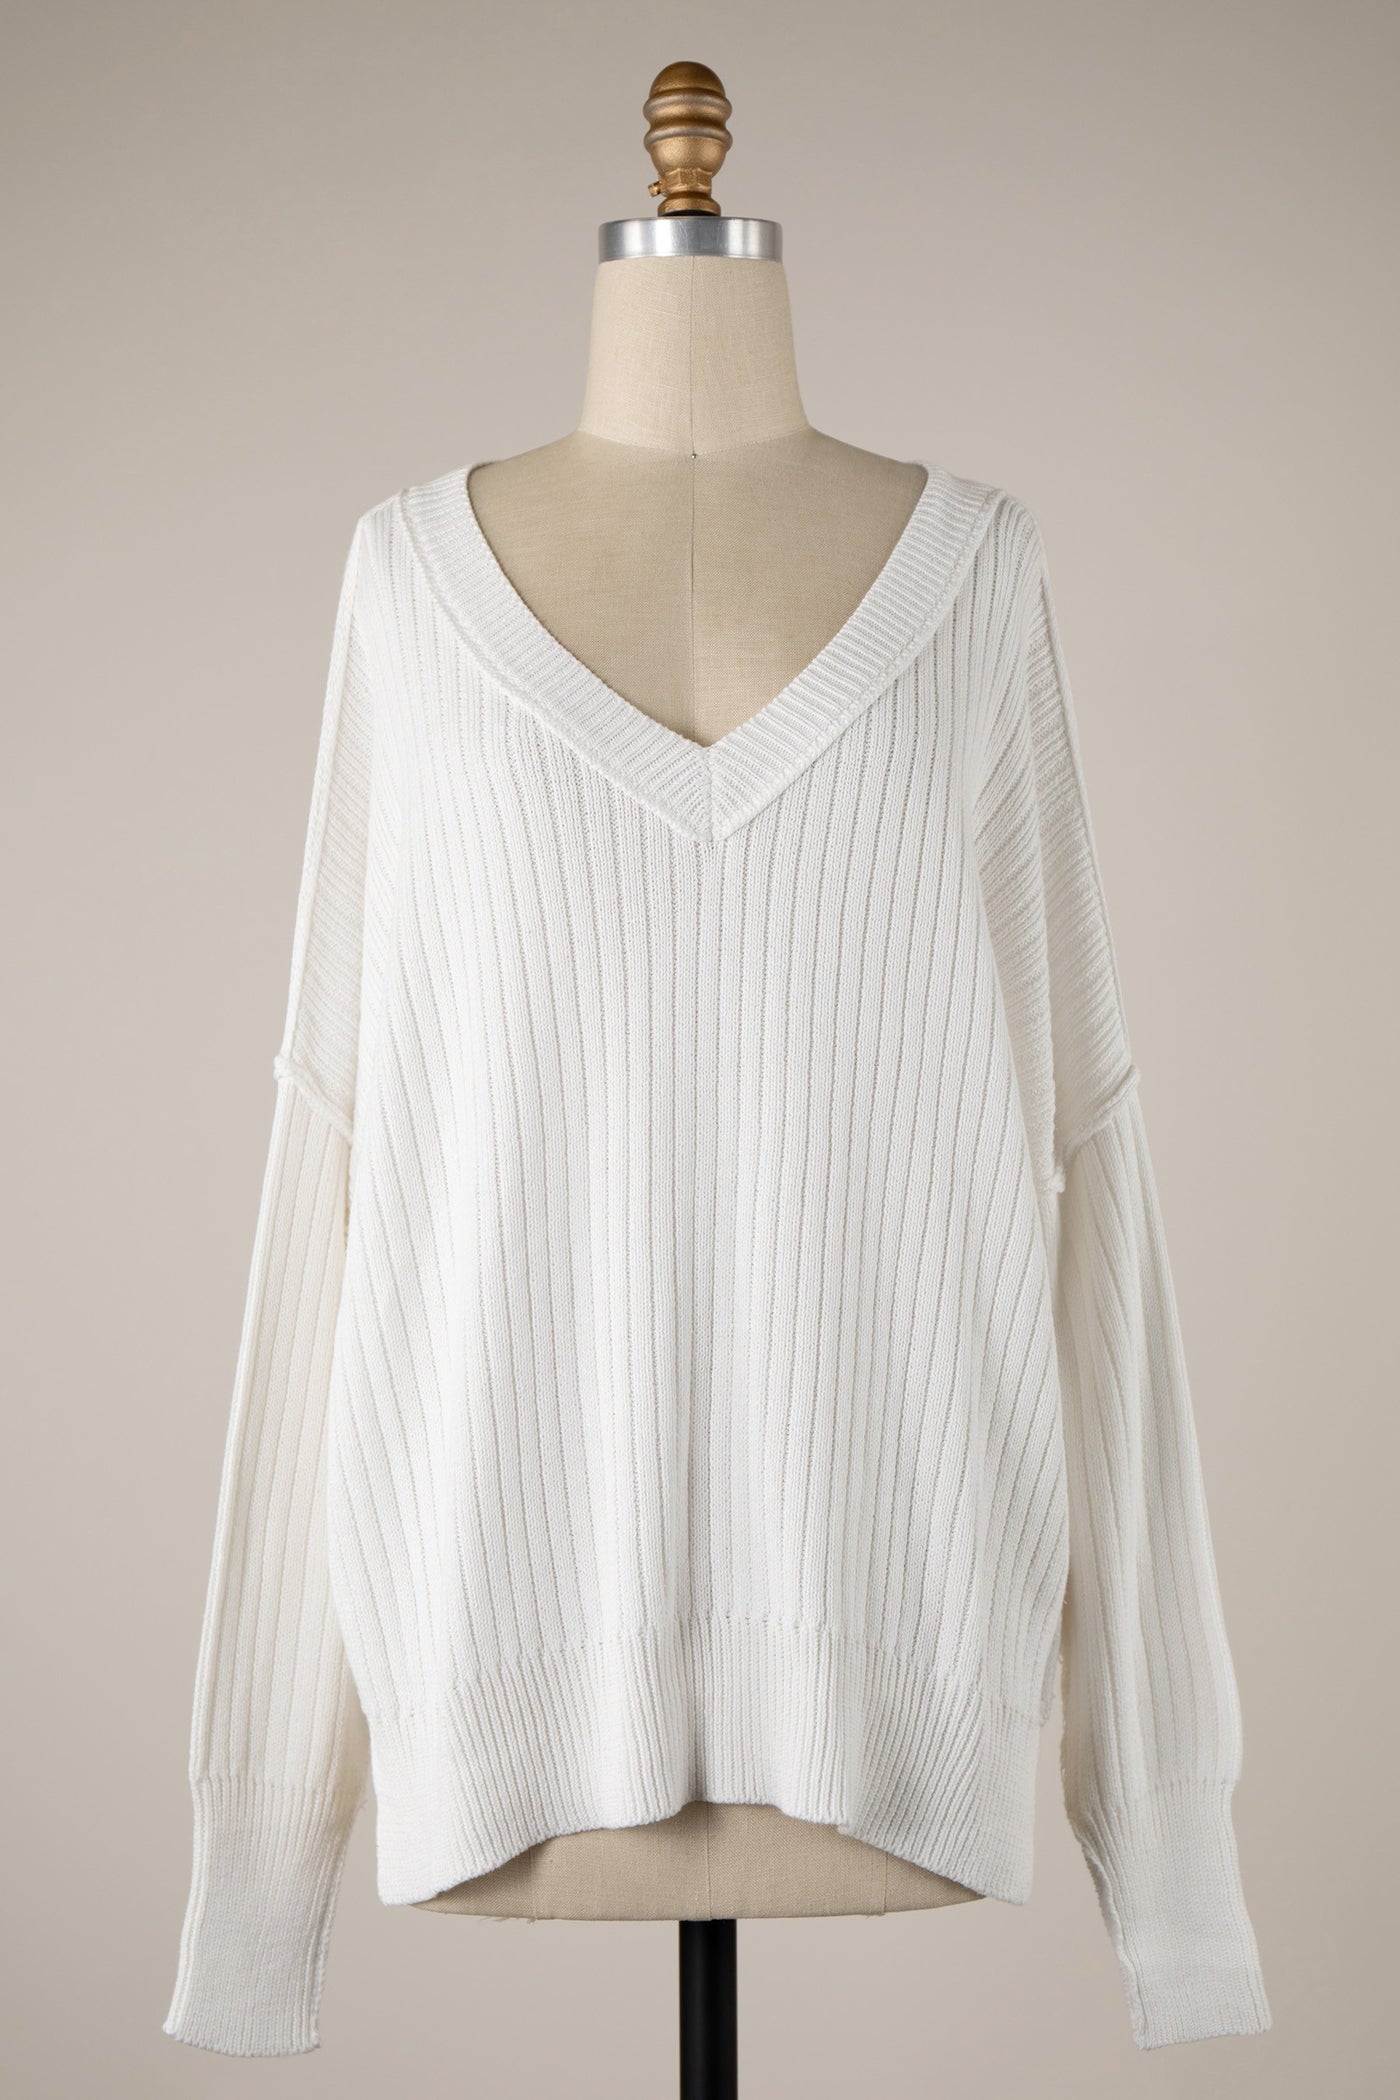 Inside Out V-Neck Light Weight Sweater- White